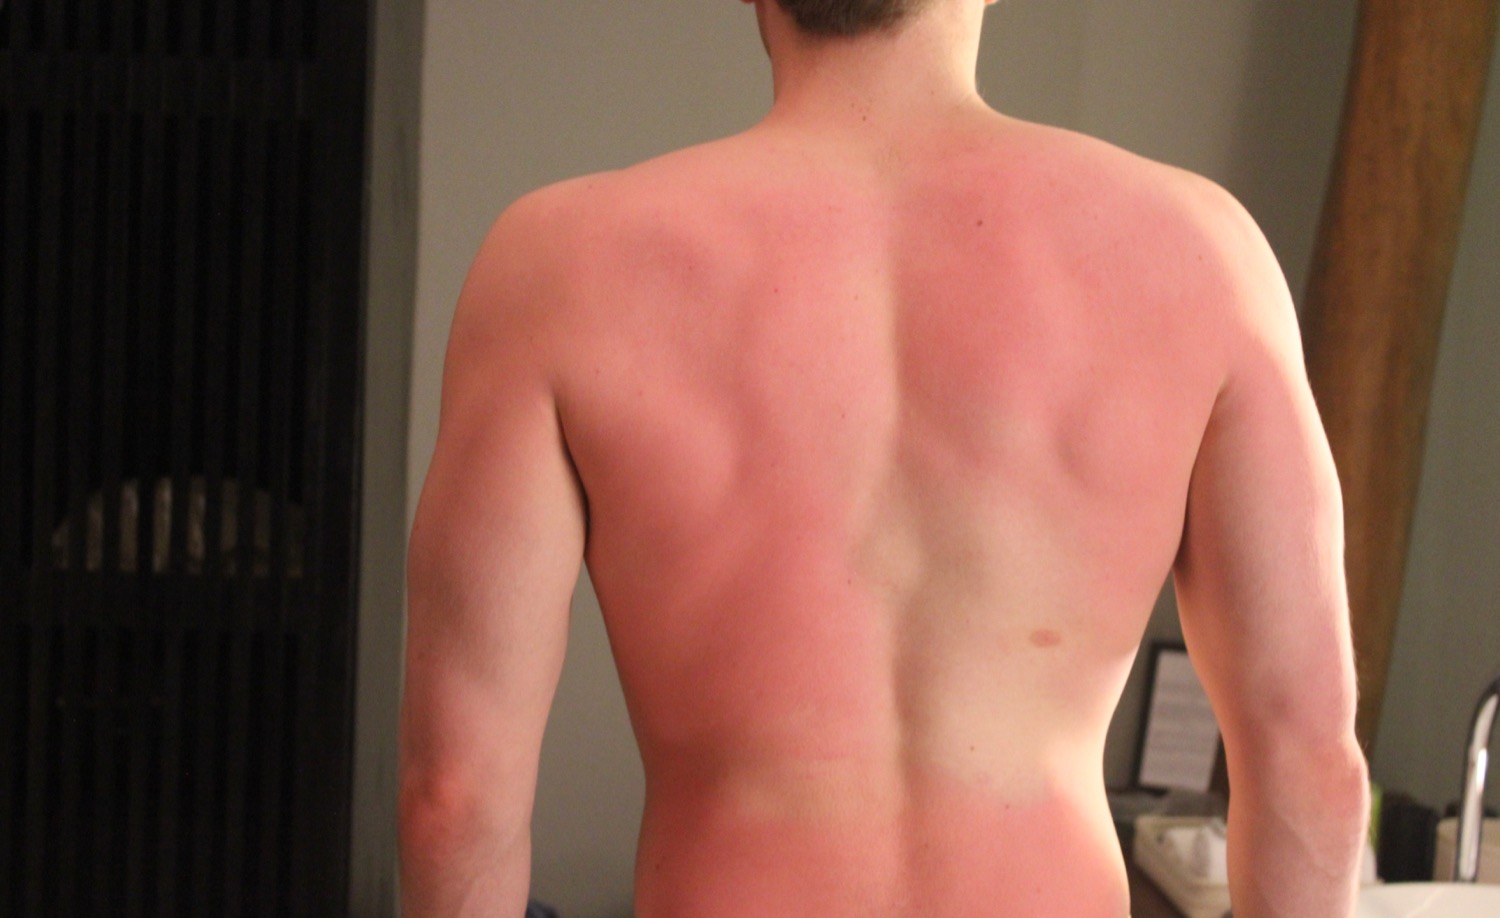 a man's back with red skin